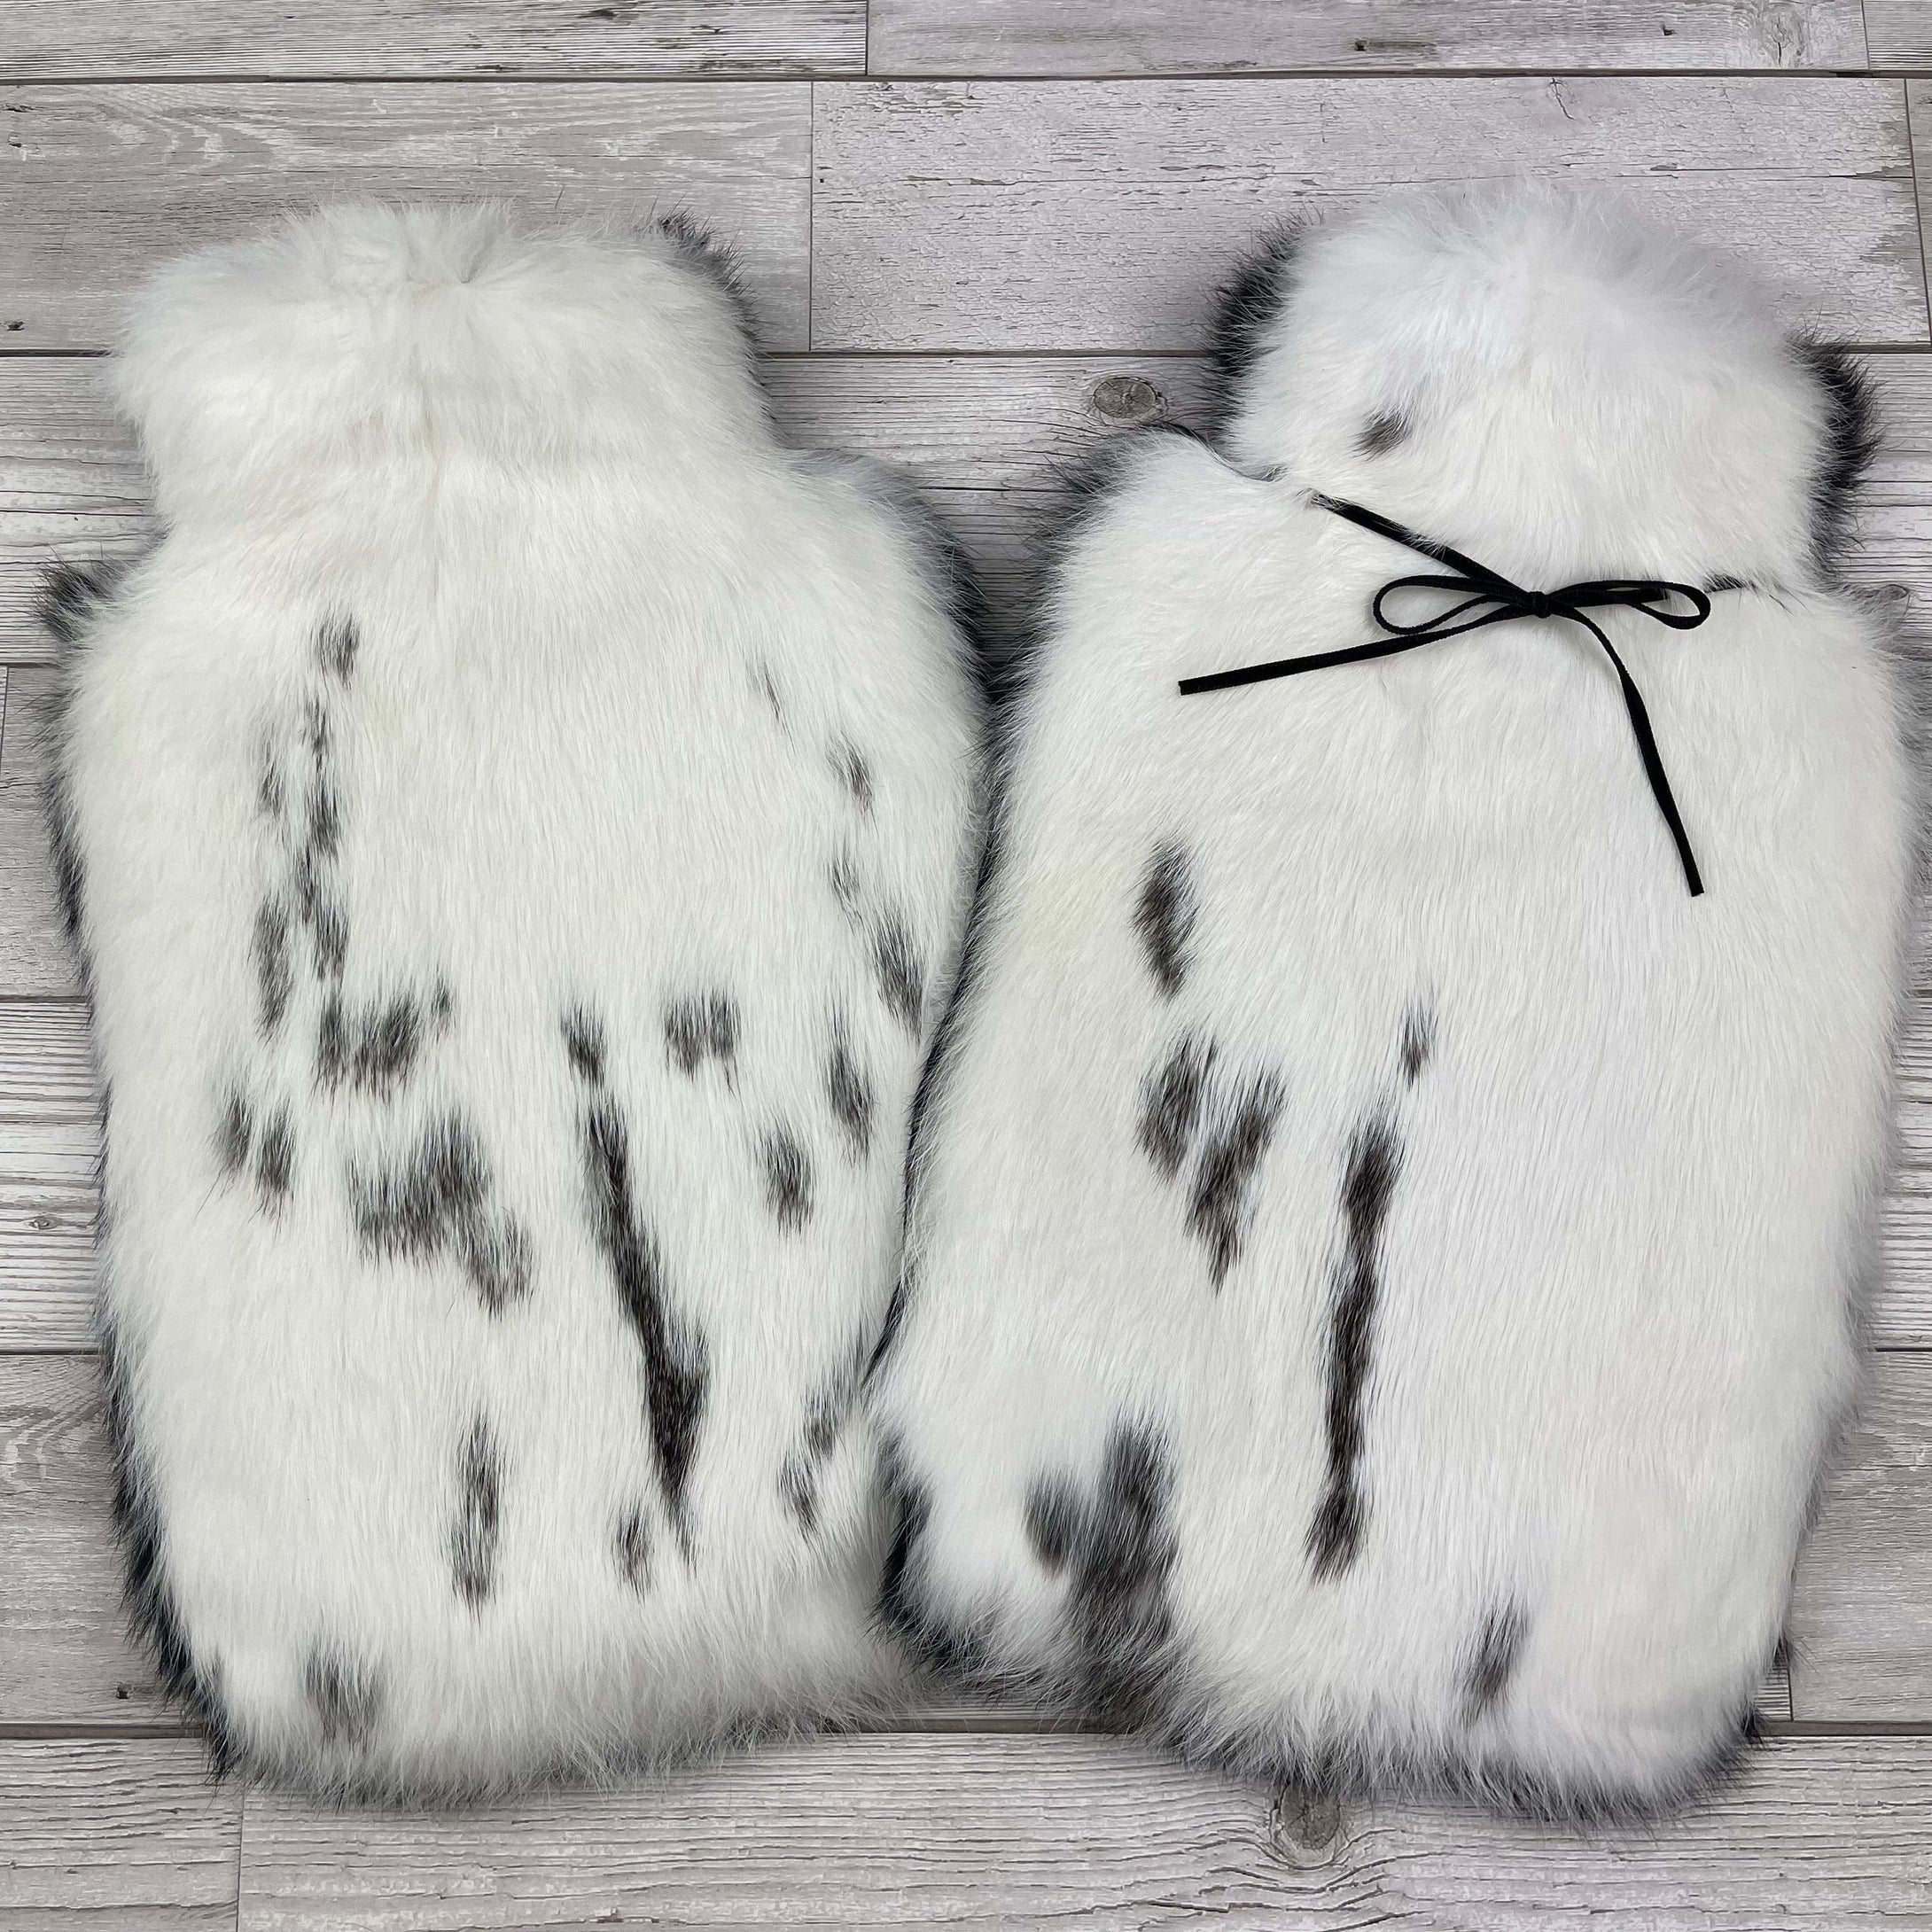 Duo of Luxury Rabbit Fur Hot Water Bottles - black and white set #404 - The Fur Hot Water Bottle Company